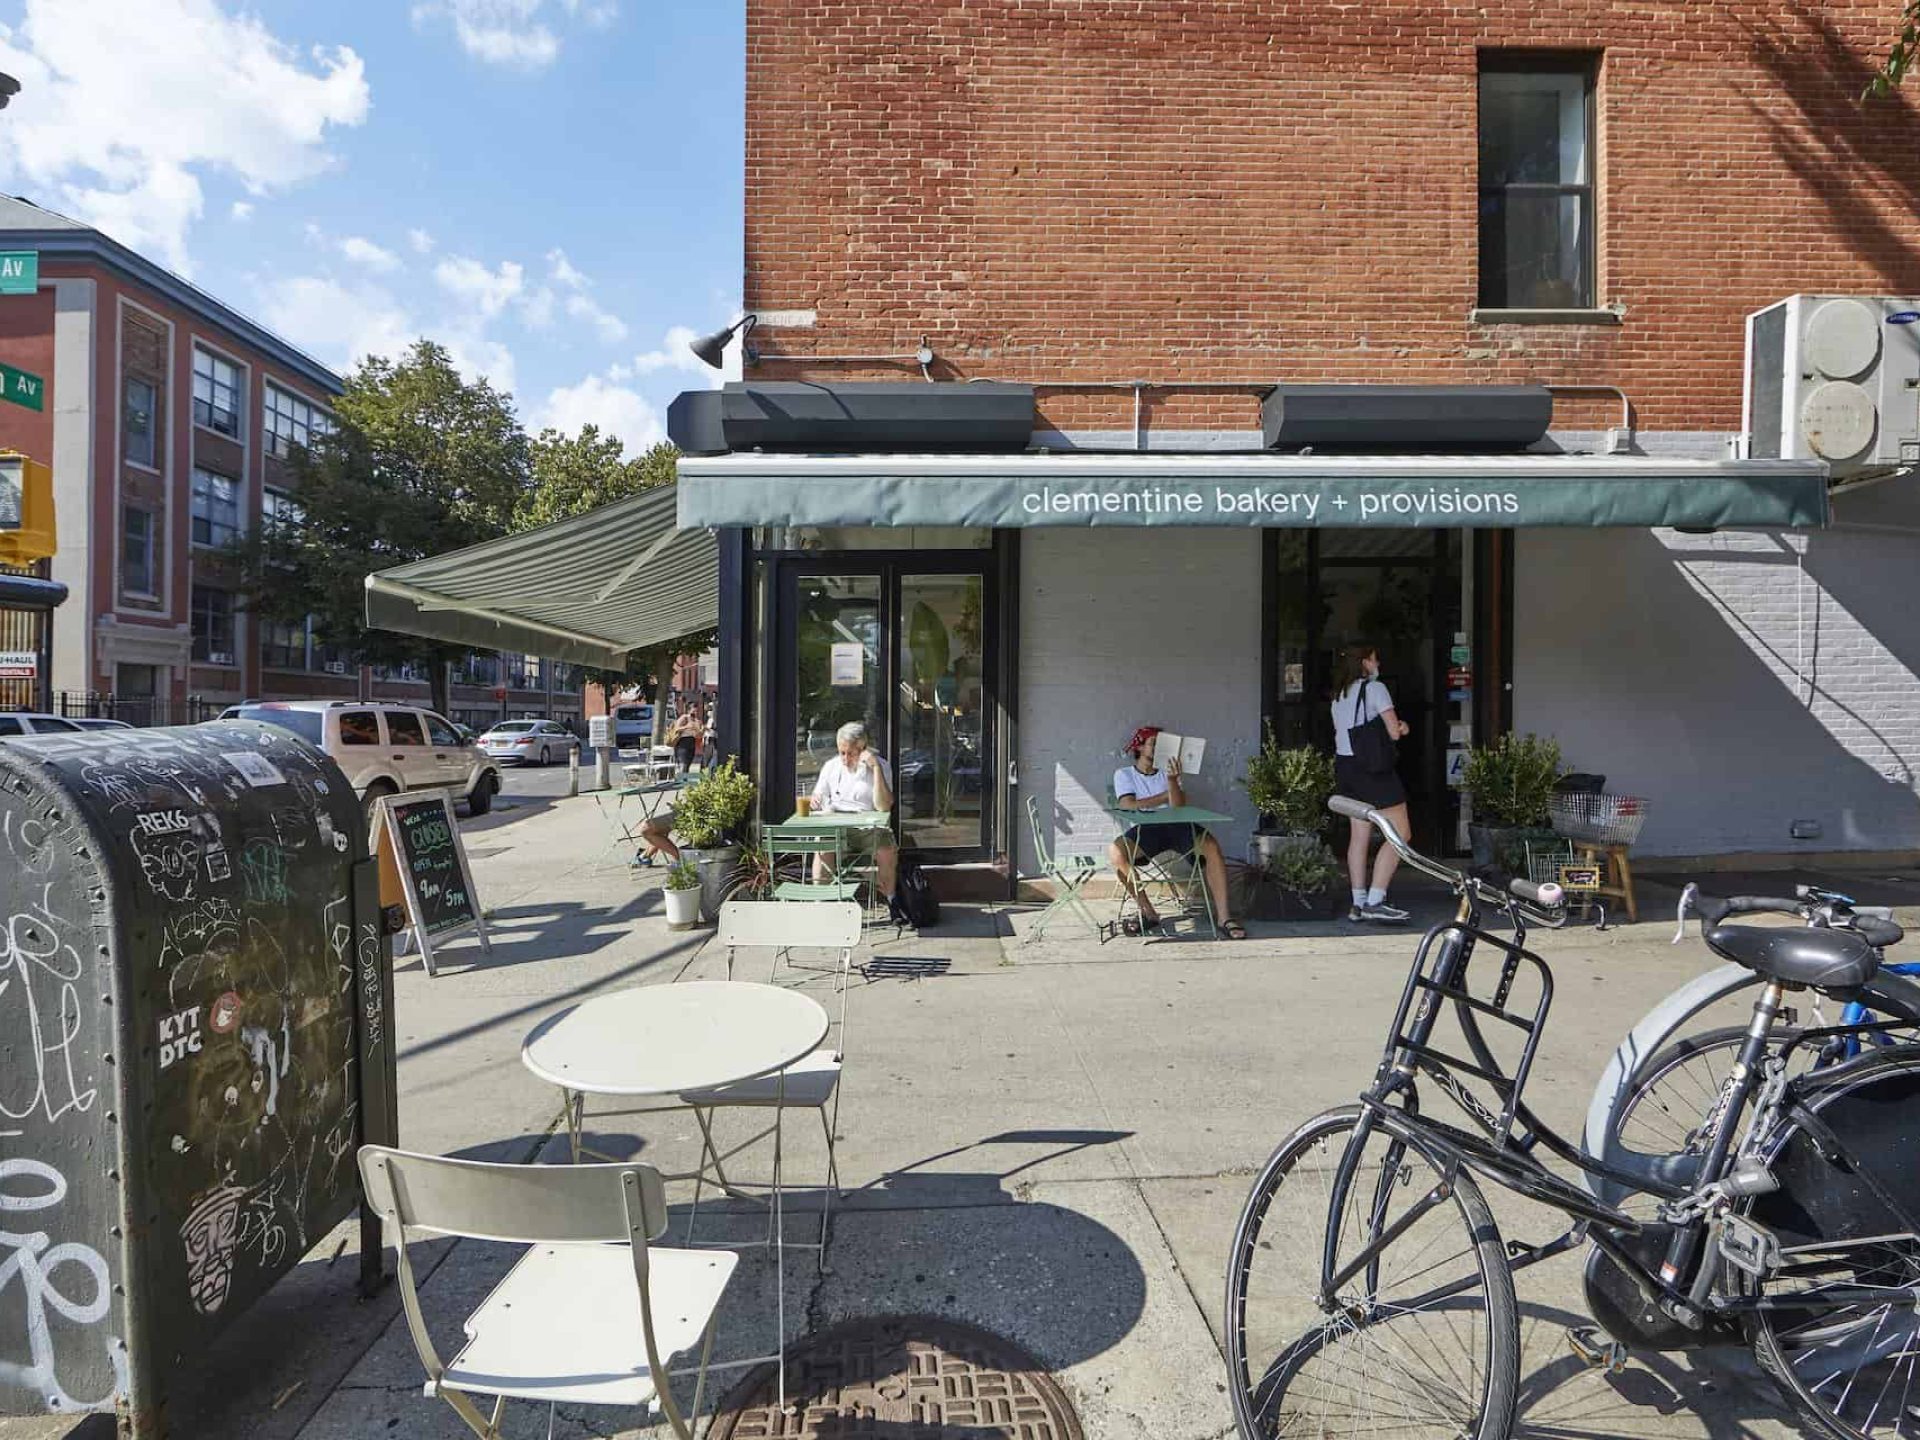 Sidewalk view of the Clementine Bakery in Clinton Hill. White painted brick wall with green awning covering outdoor seating.